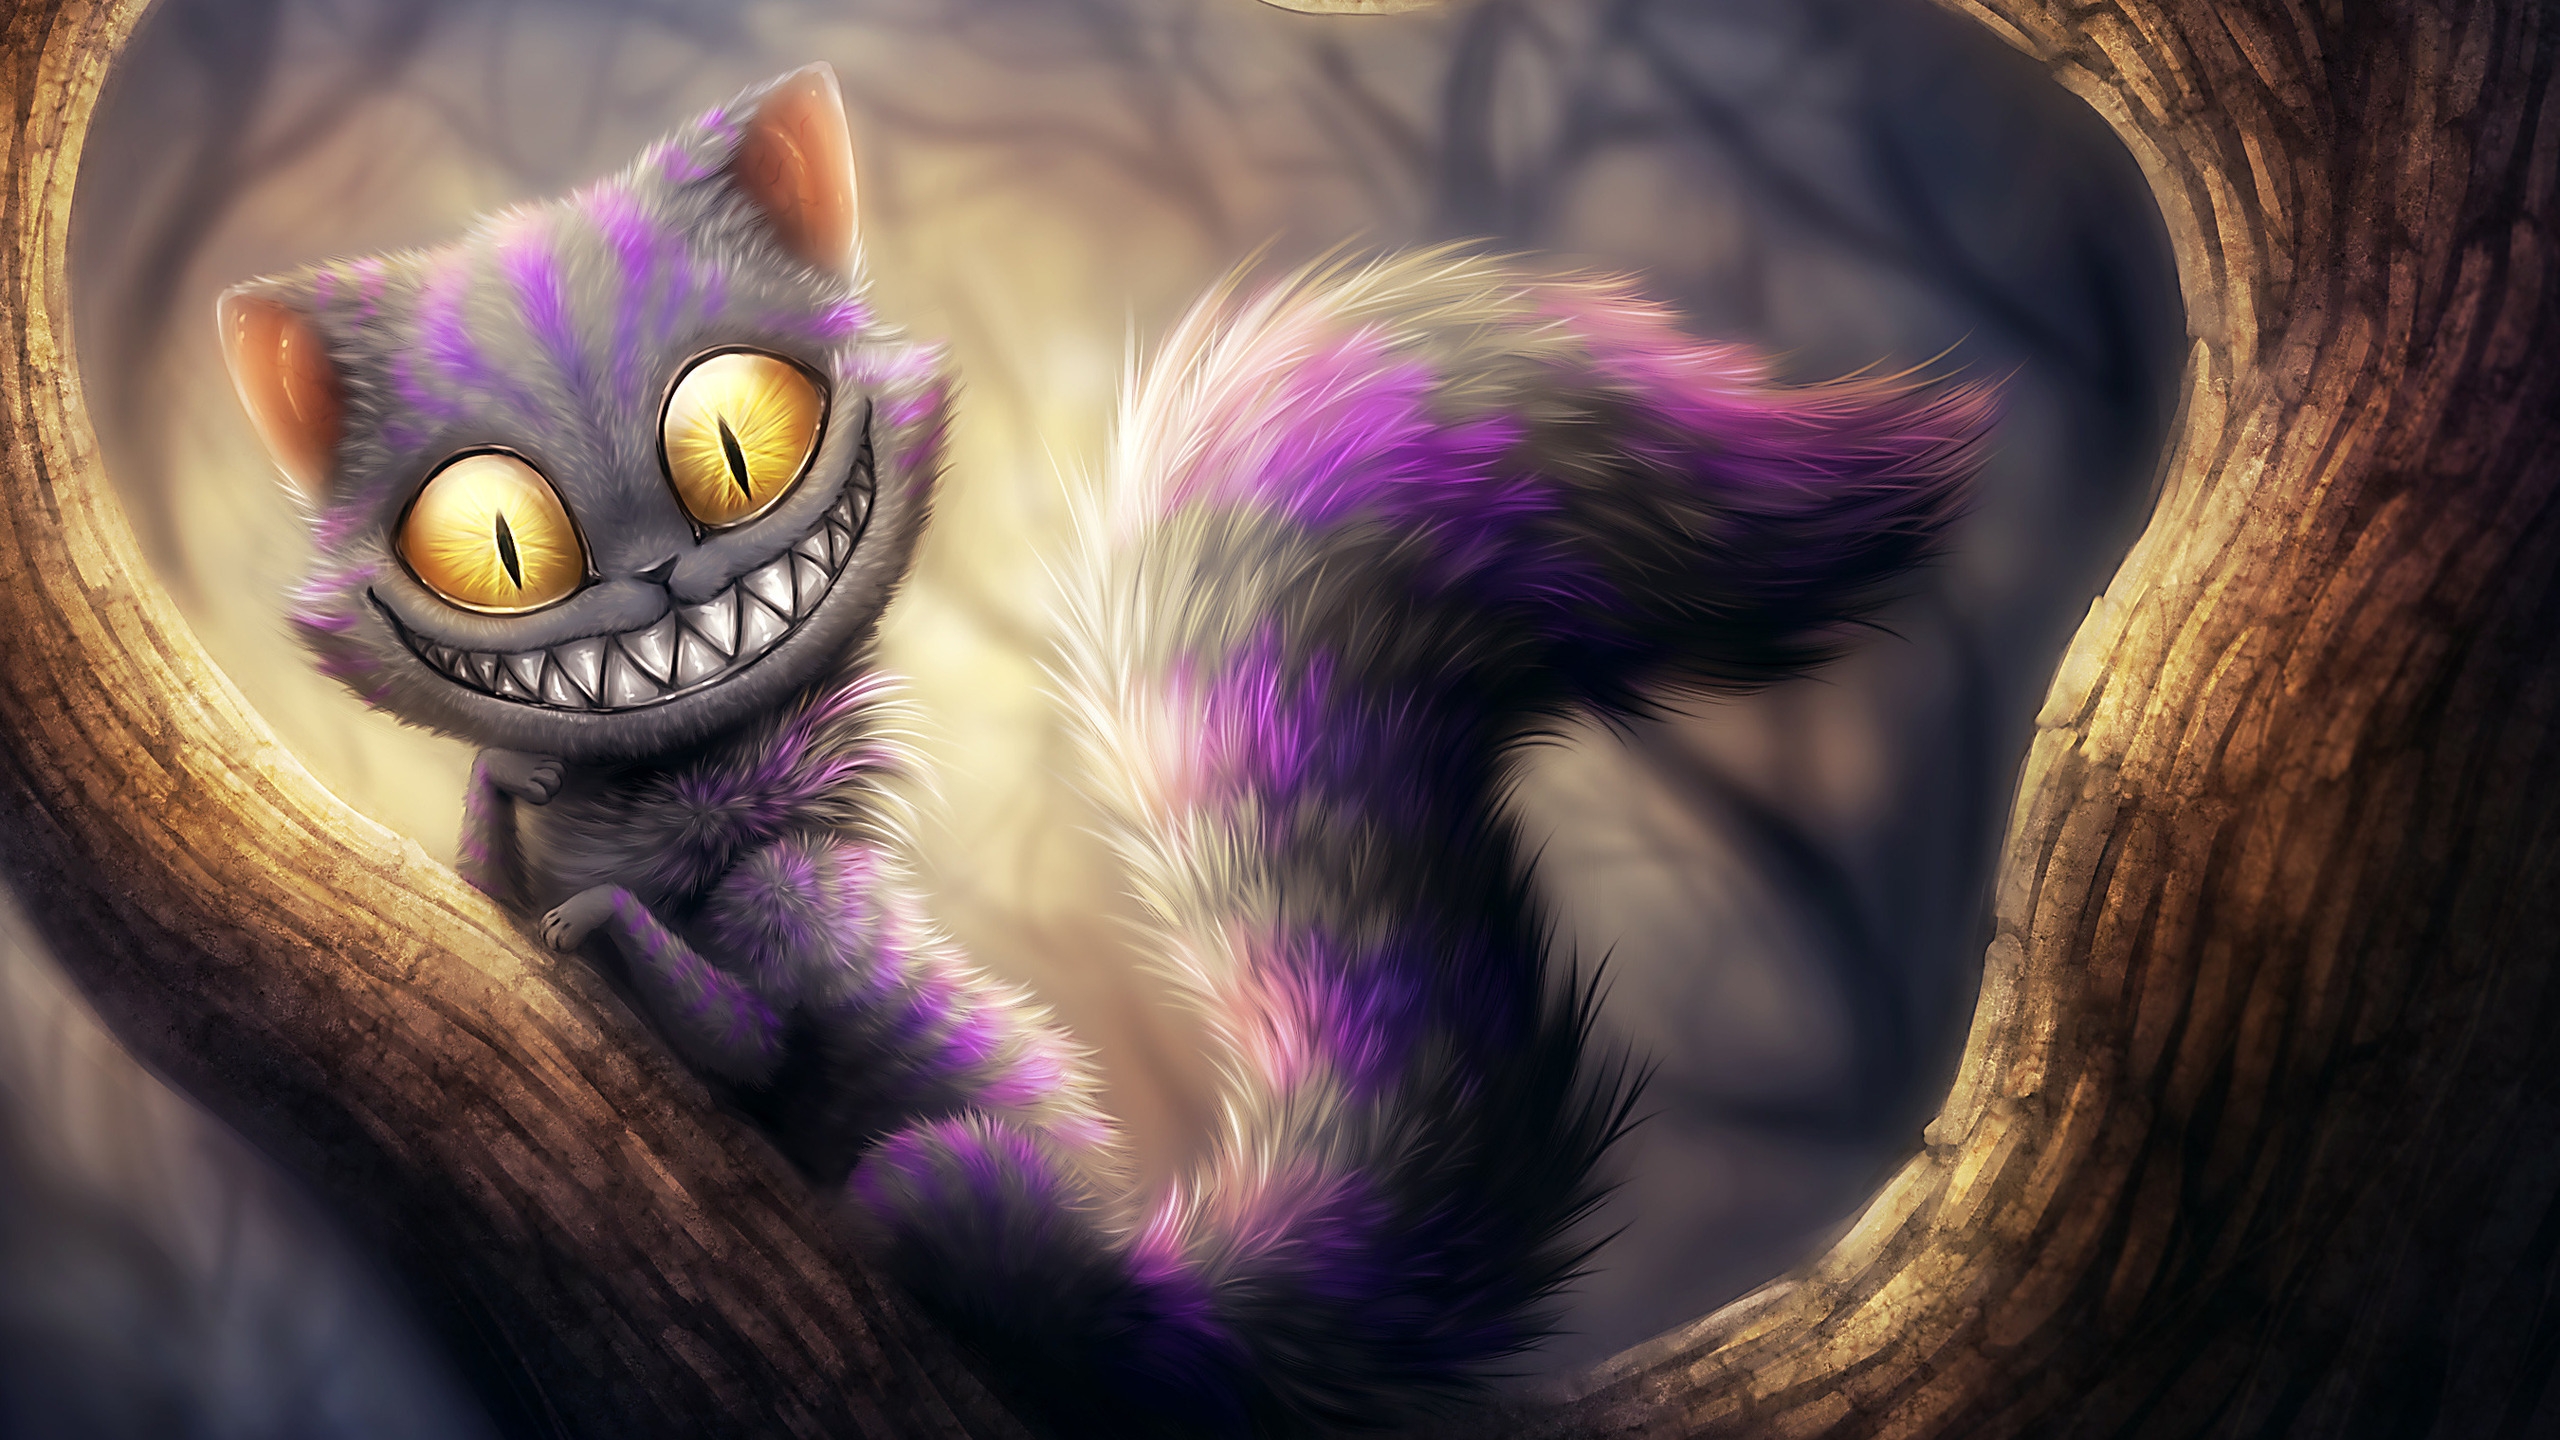 Cheshire Cat from Alice Adventures in Wonderland for 2560x1440 HDTV resolution